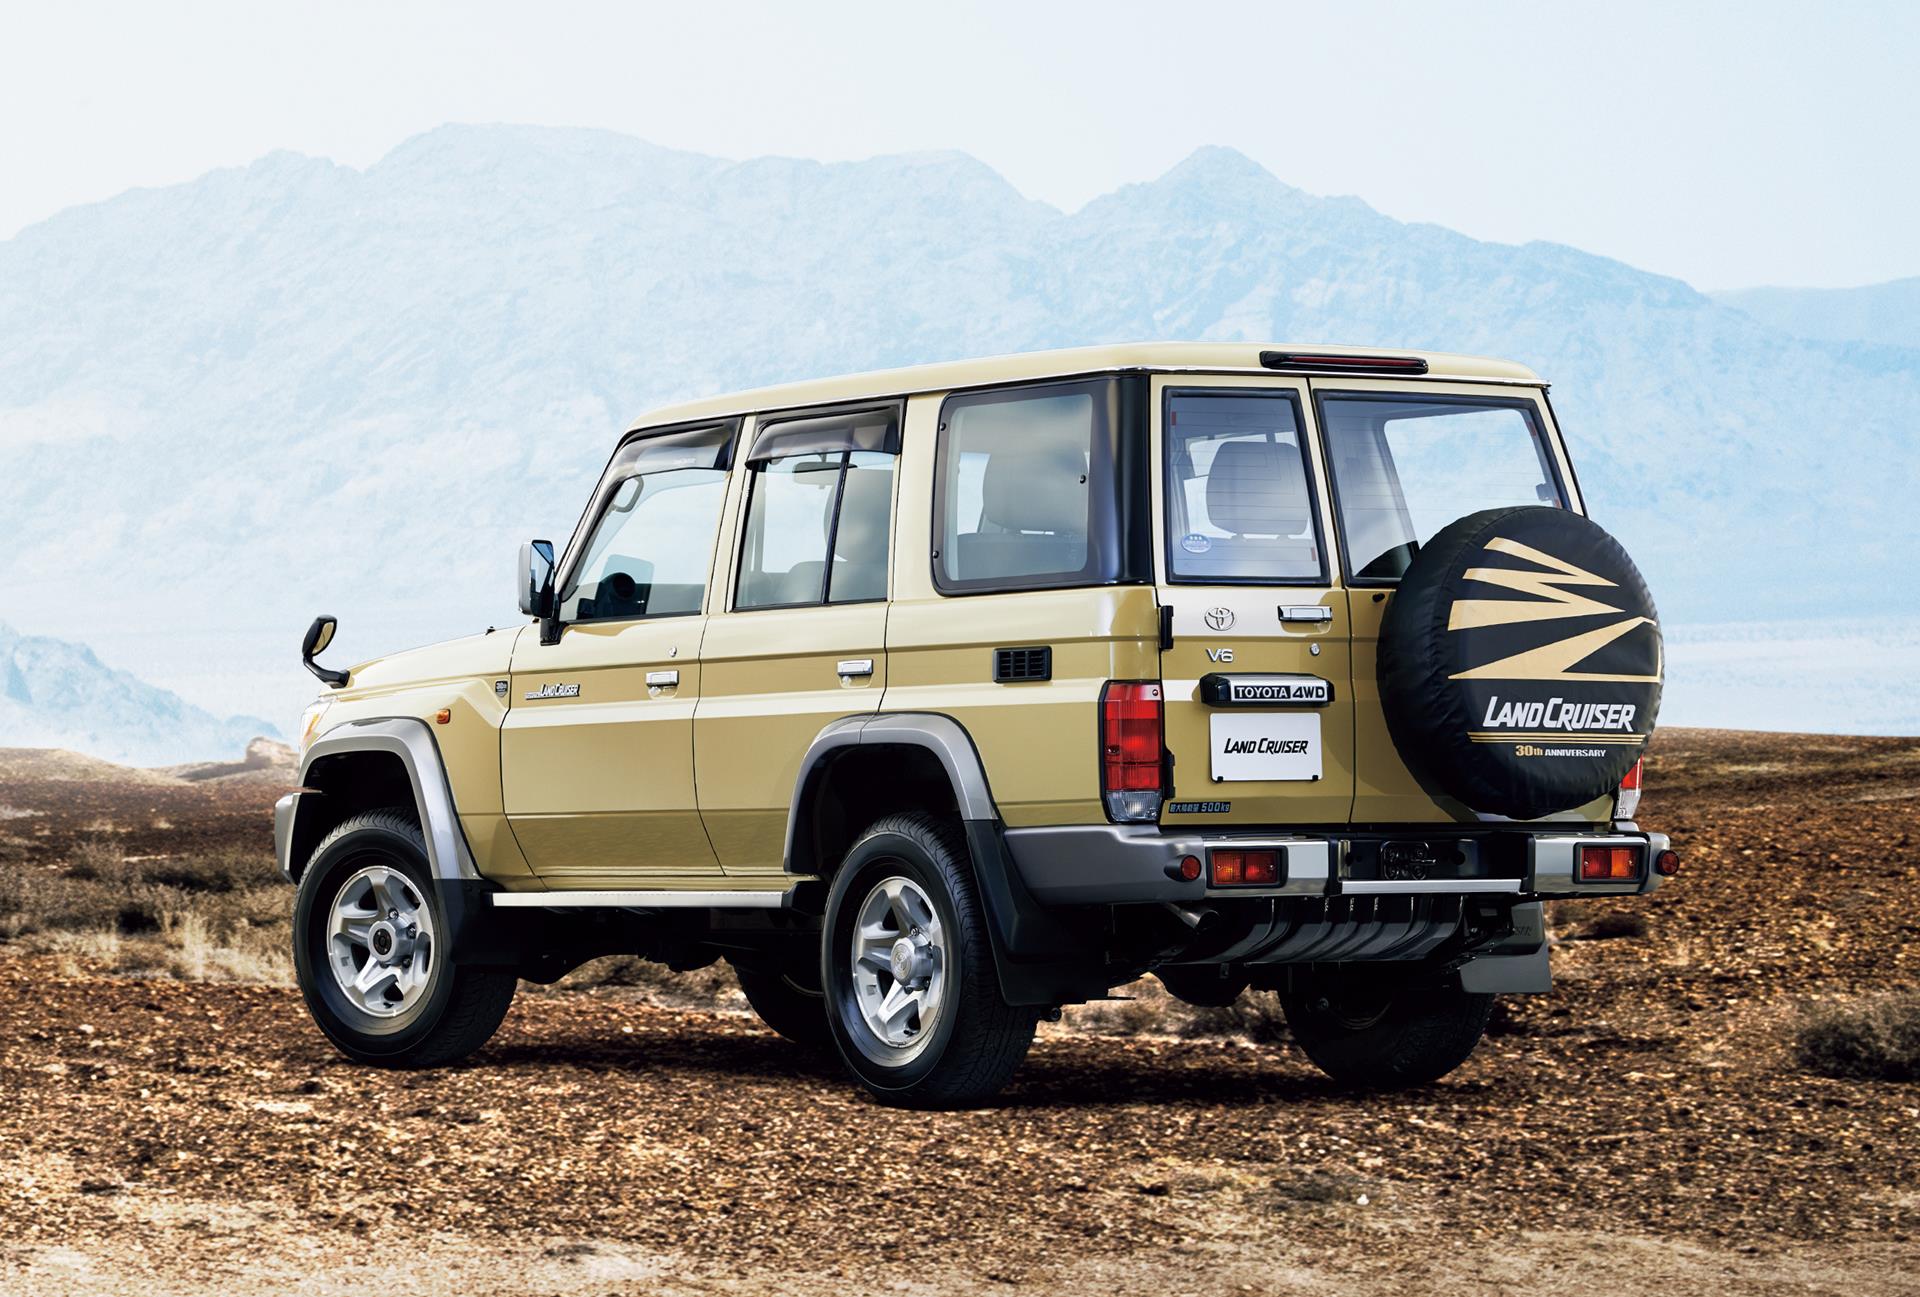 Land Cruiser 70 pickup (Japan commemorative re-release; with options)